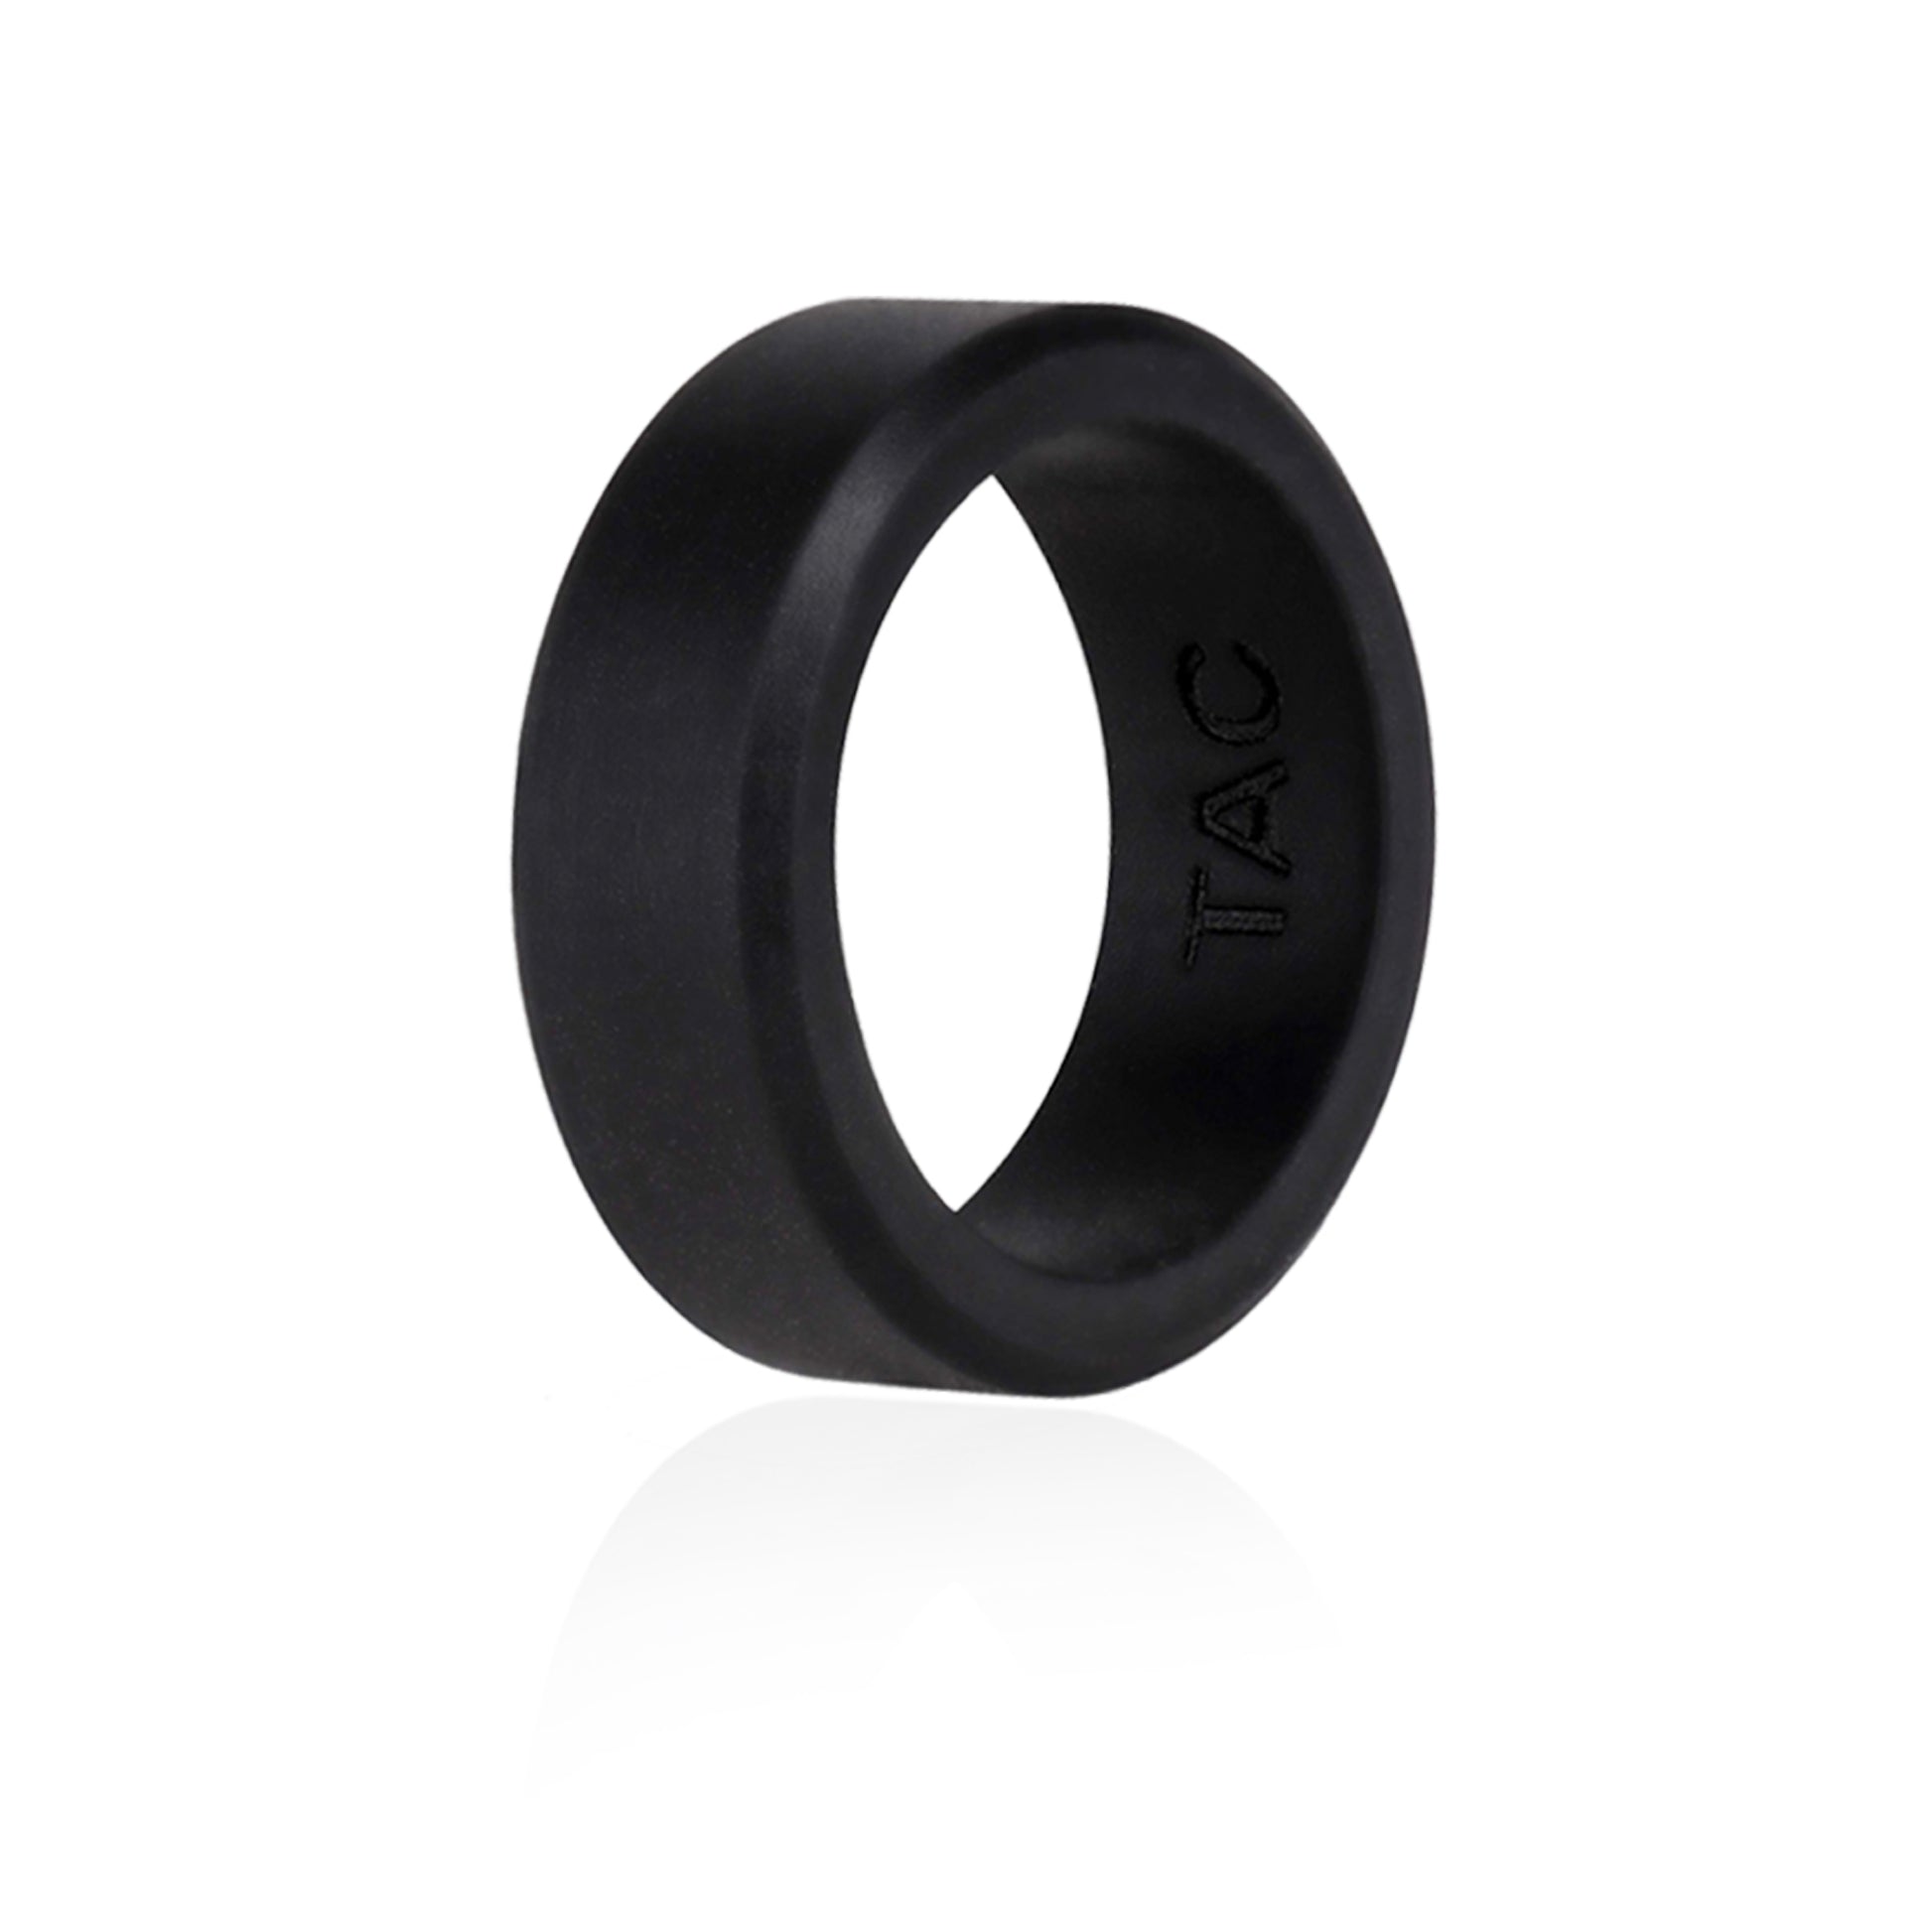 Silicone Wedding Rings for Men, Breathable Rubber Bands for Workout